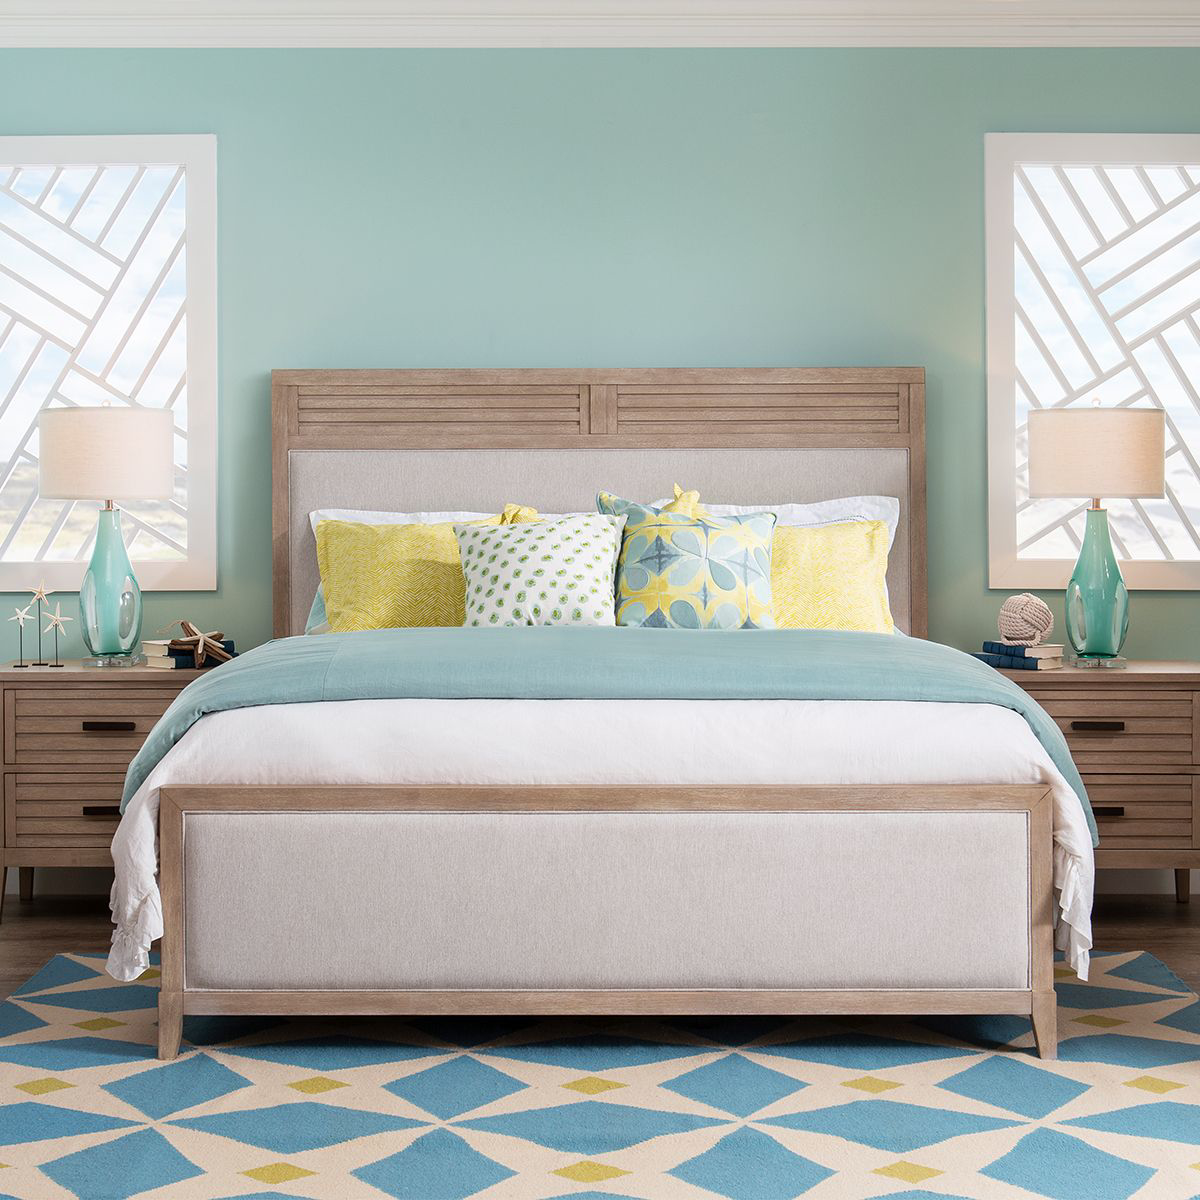 Picture of EDGEWATER QUEEN UPHOLSTERED BED IN SAND